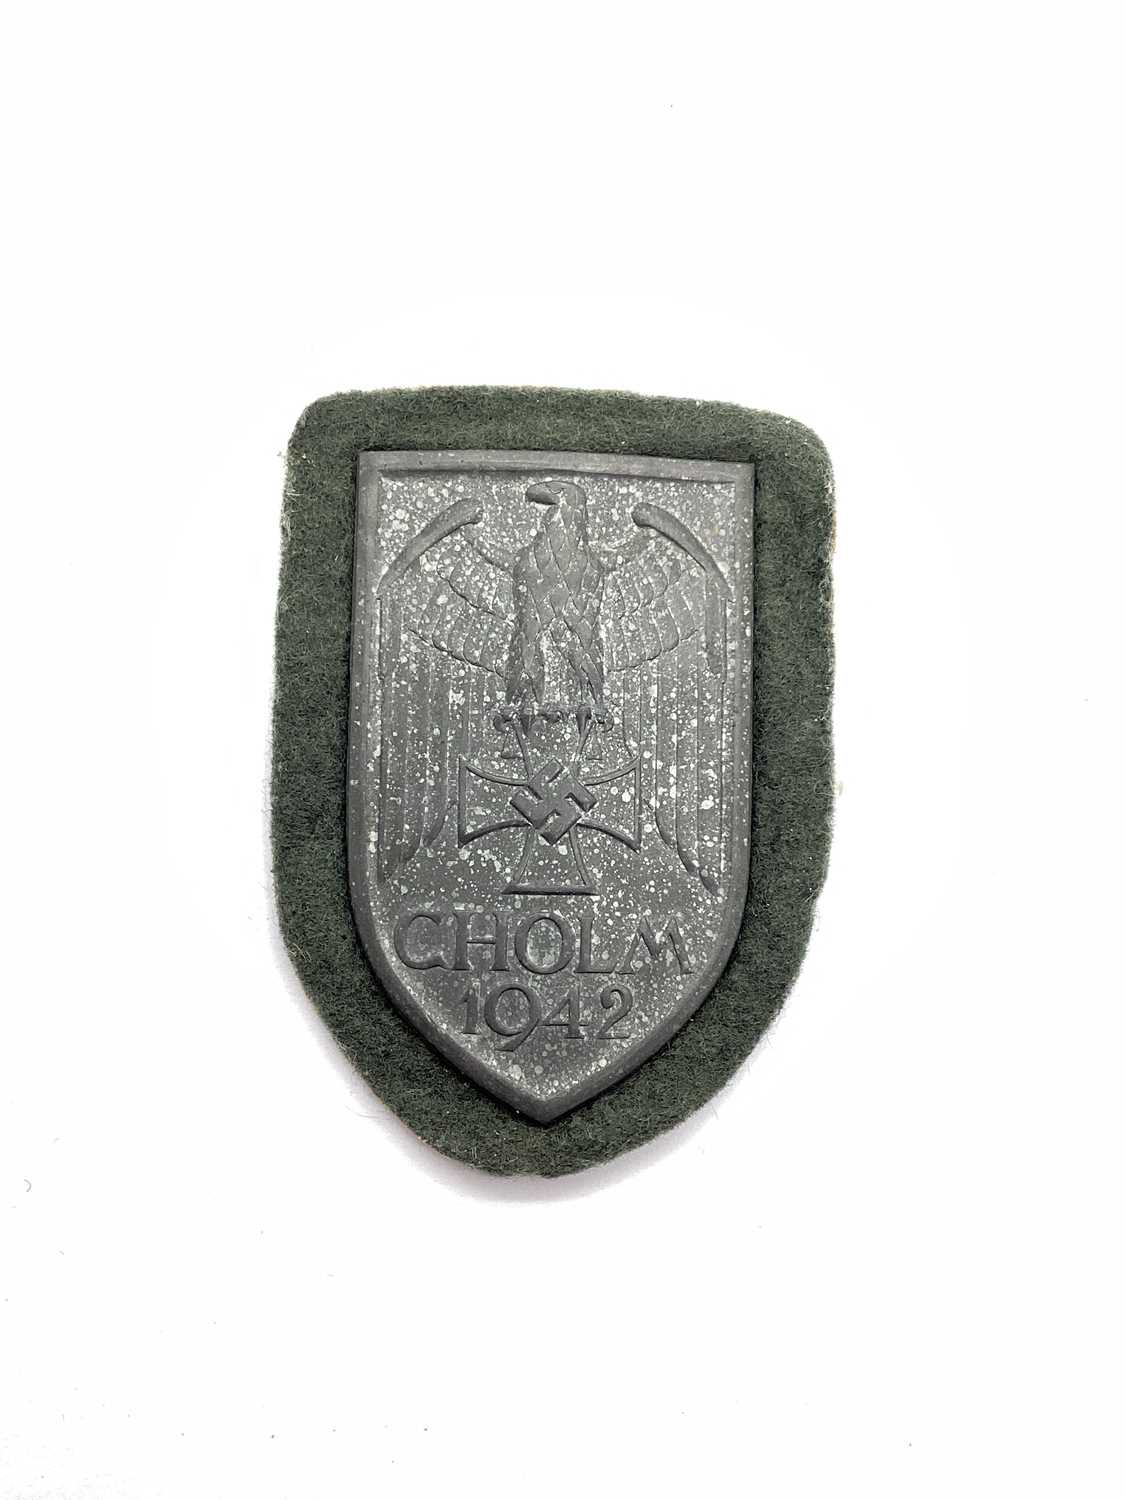 WWI Third Reich German Army Cholm/Kholm 1942 Campaign Shield, with field grey cloth backing. Due